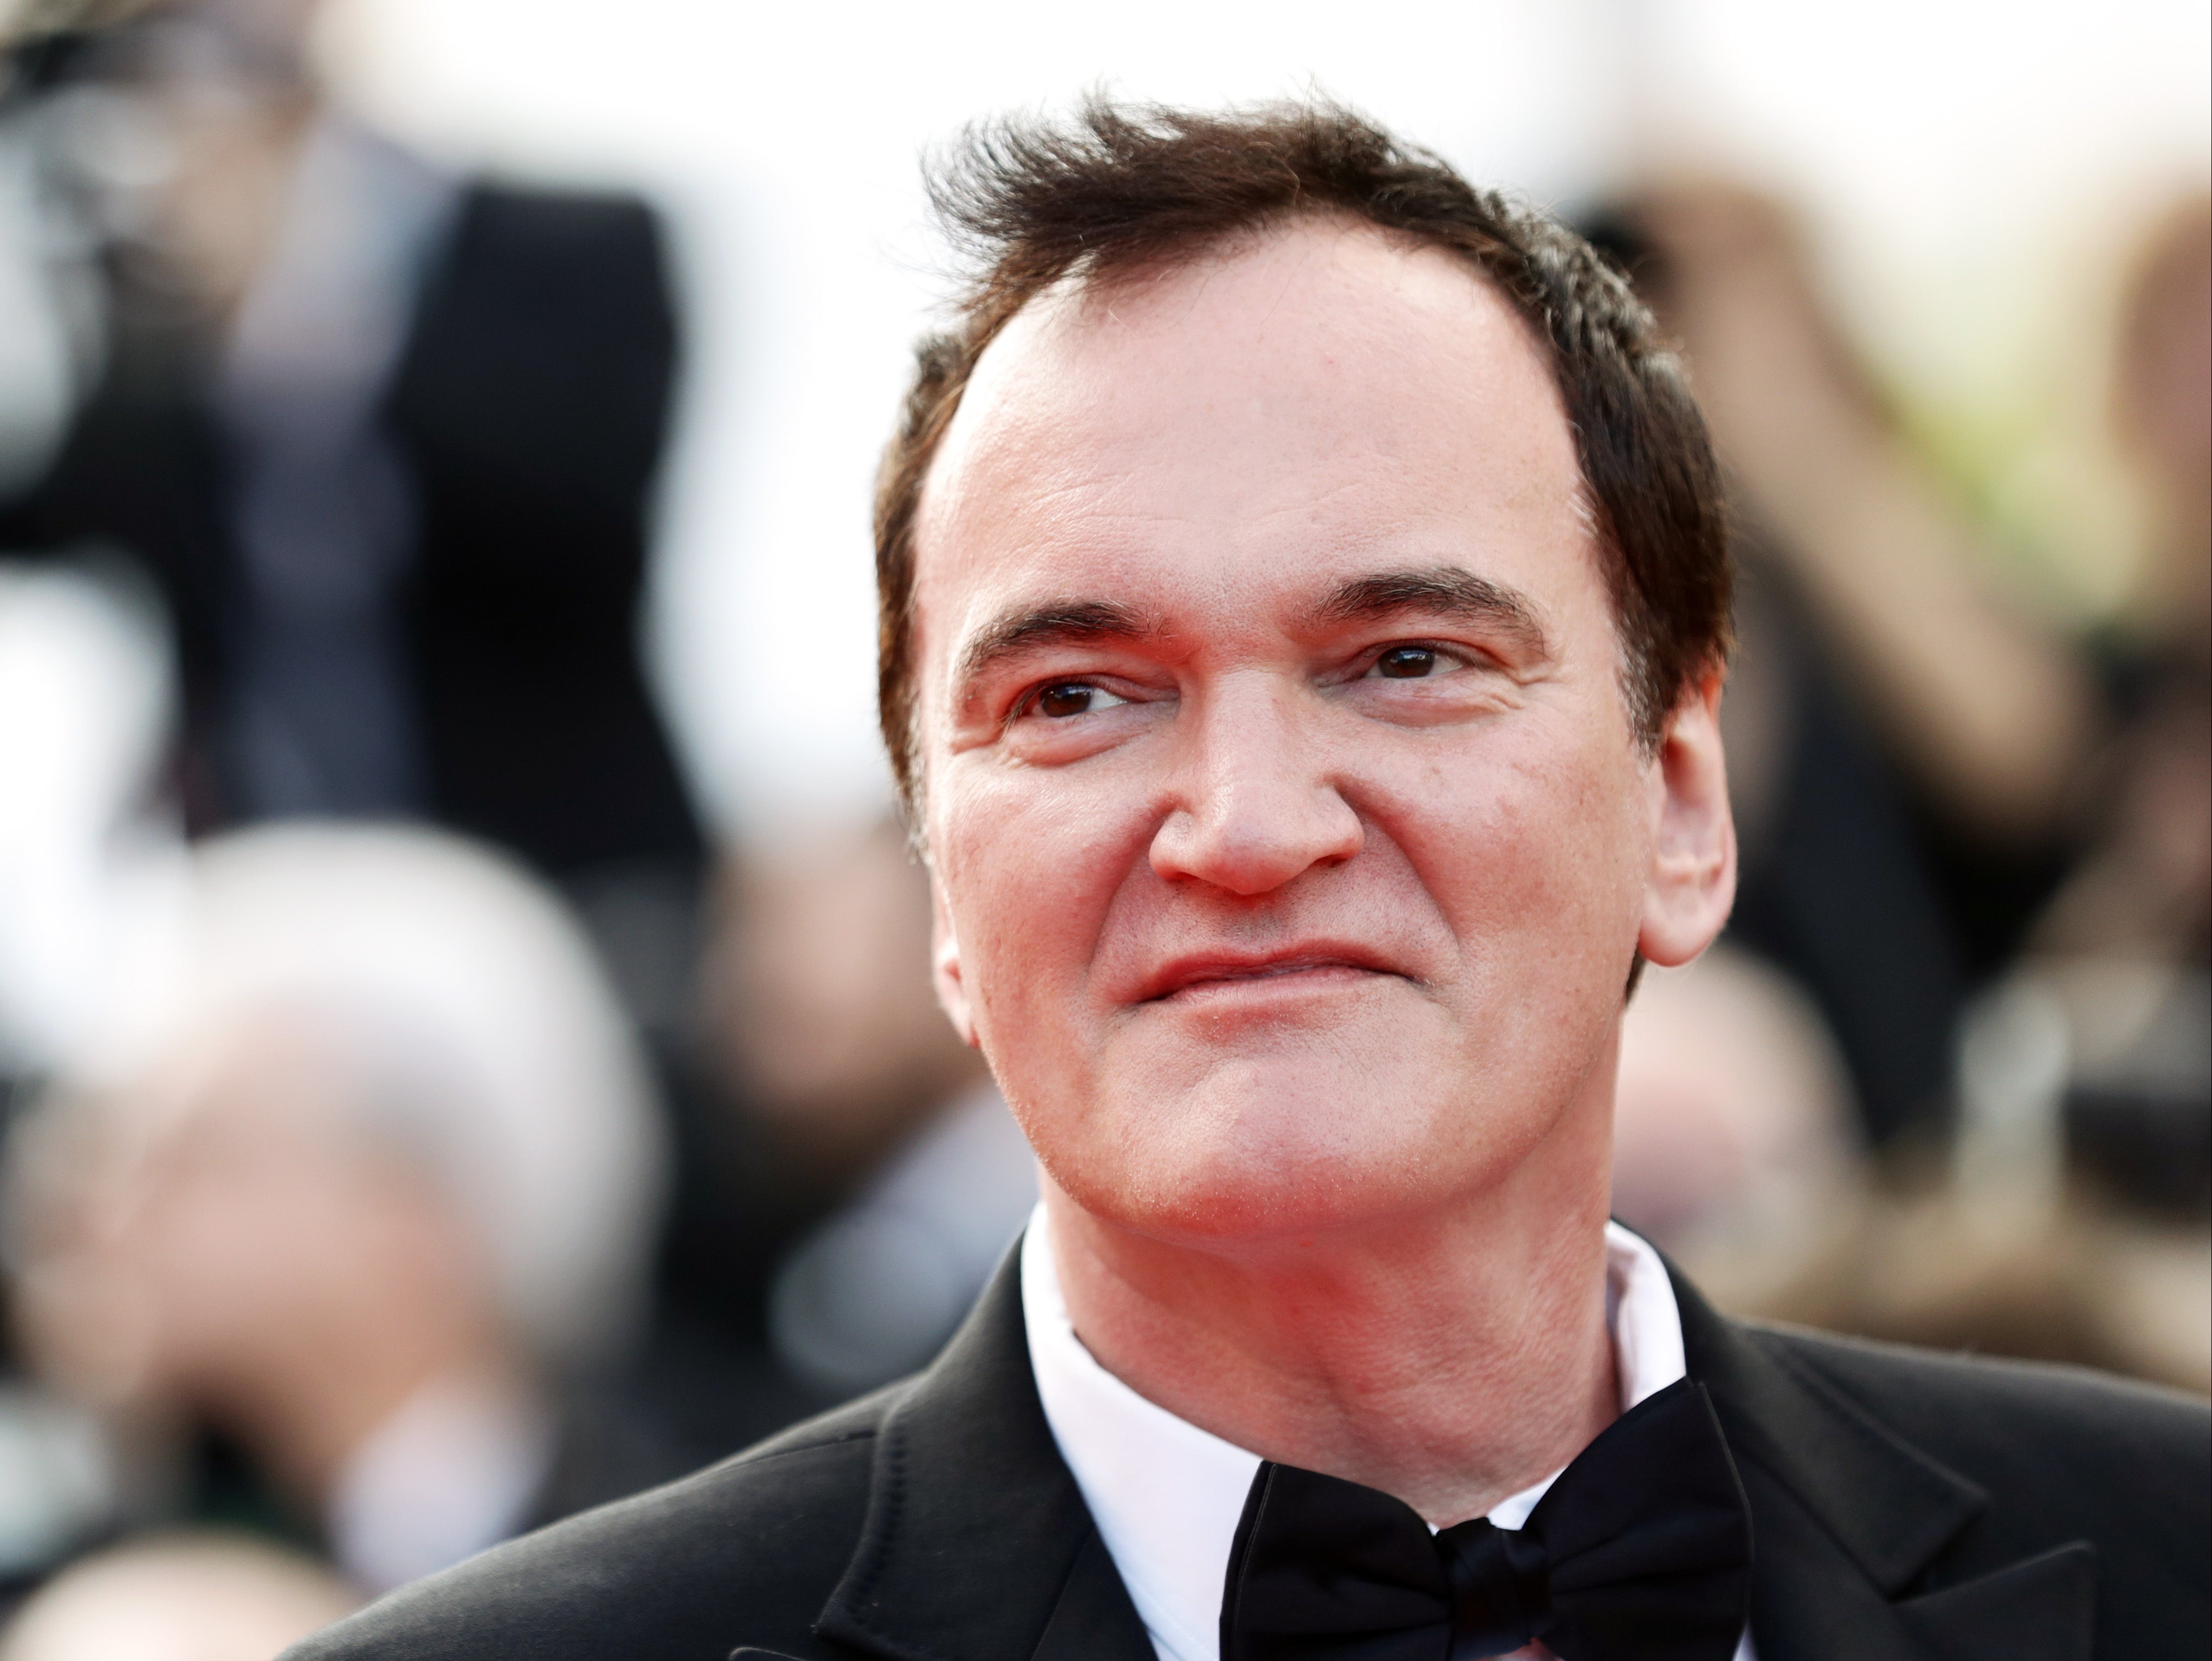 Quentin Tarantino has said he will quit making films after his 10th